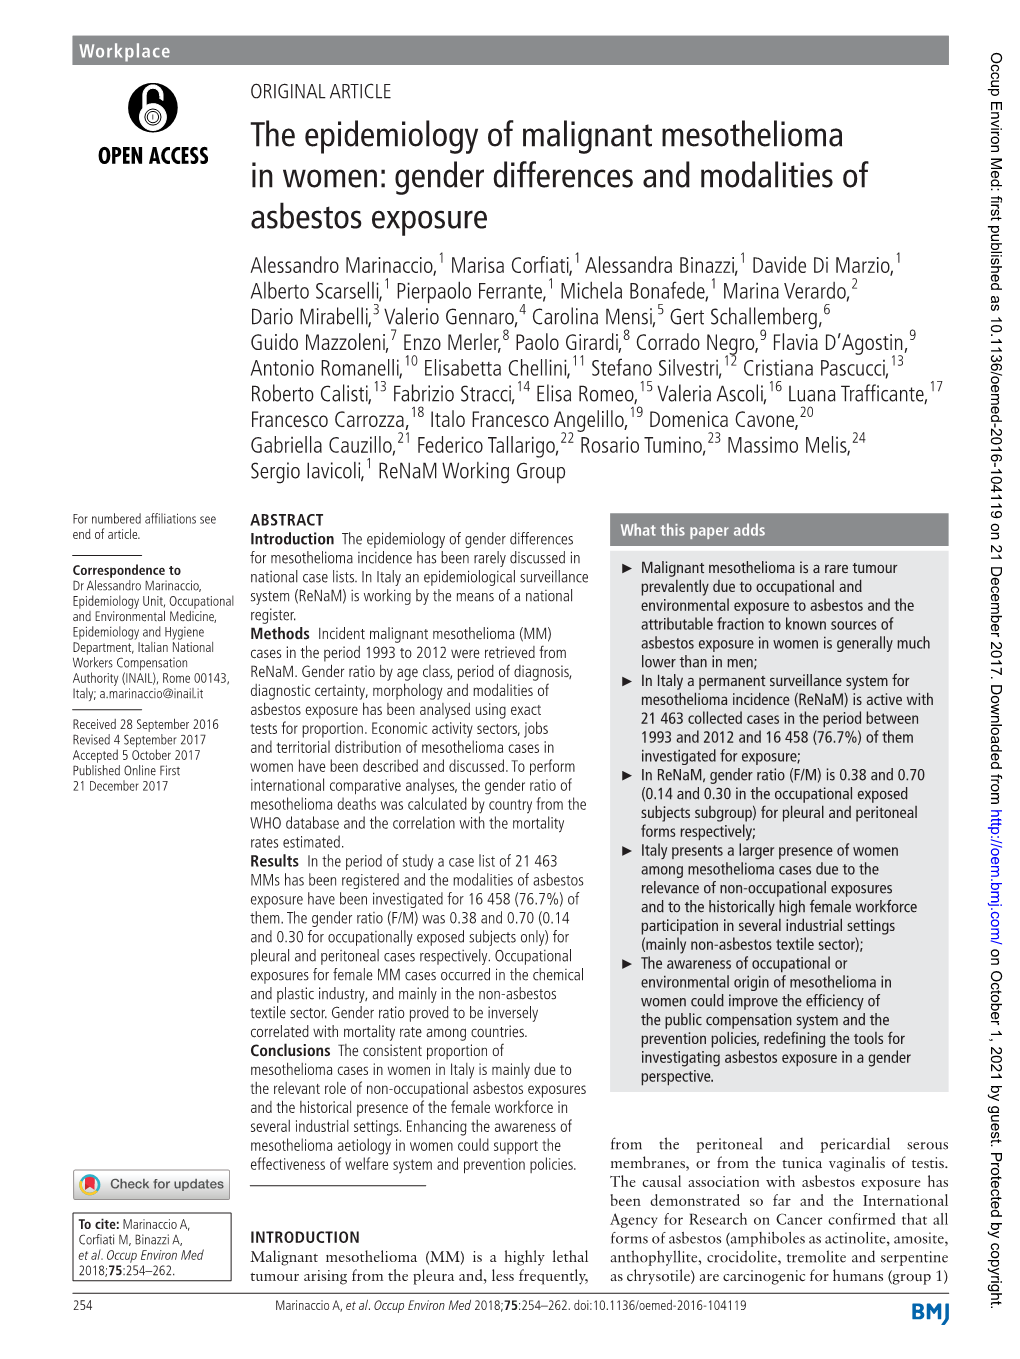 Gender Differences and Modalities of Asbestos Exposure